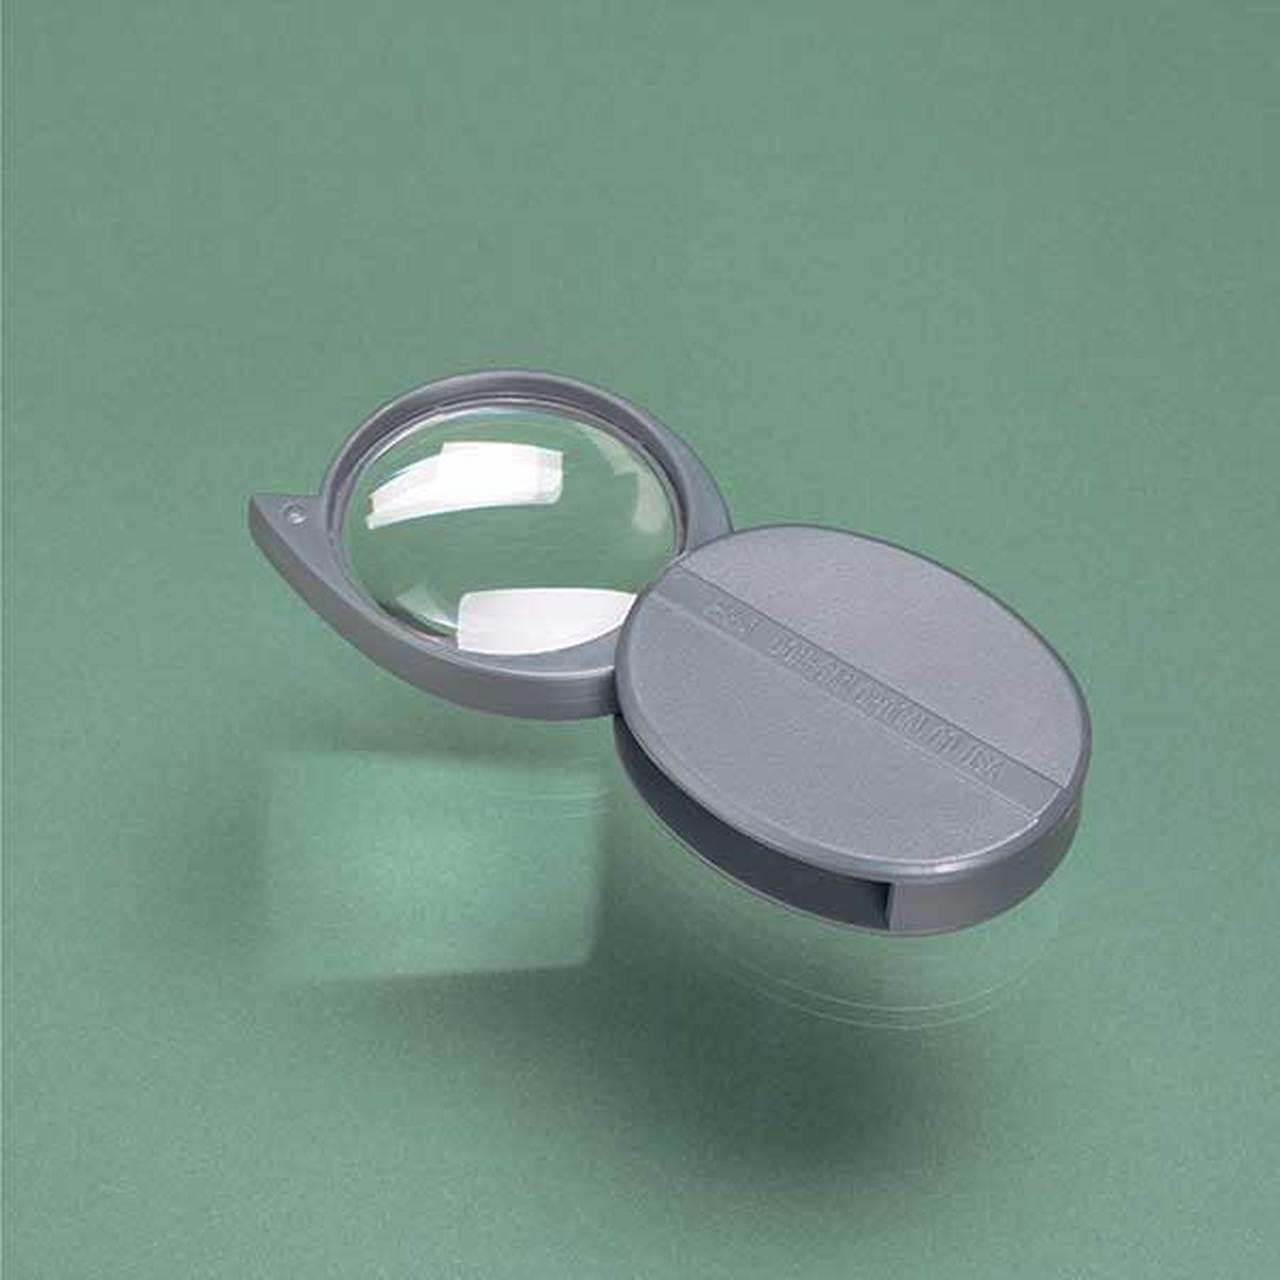 Swing out 5X Magnifier.. - The Low Vision Store